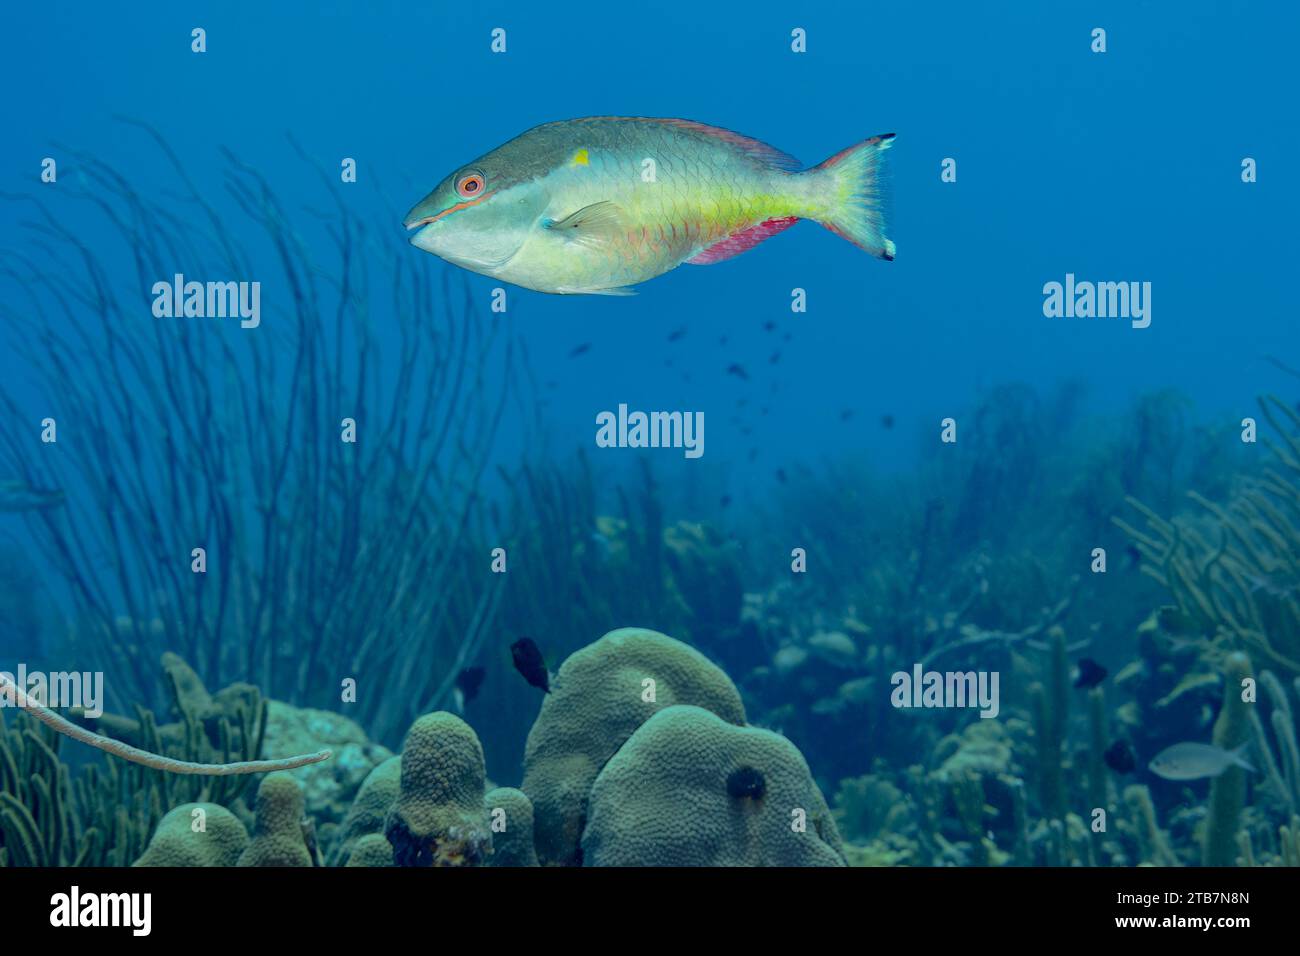 A vibrant rainbow parrotfish swims through a serene seascape with soft corals and seagrass in the background, showcasing underwater biodiversity. Stock Photo